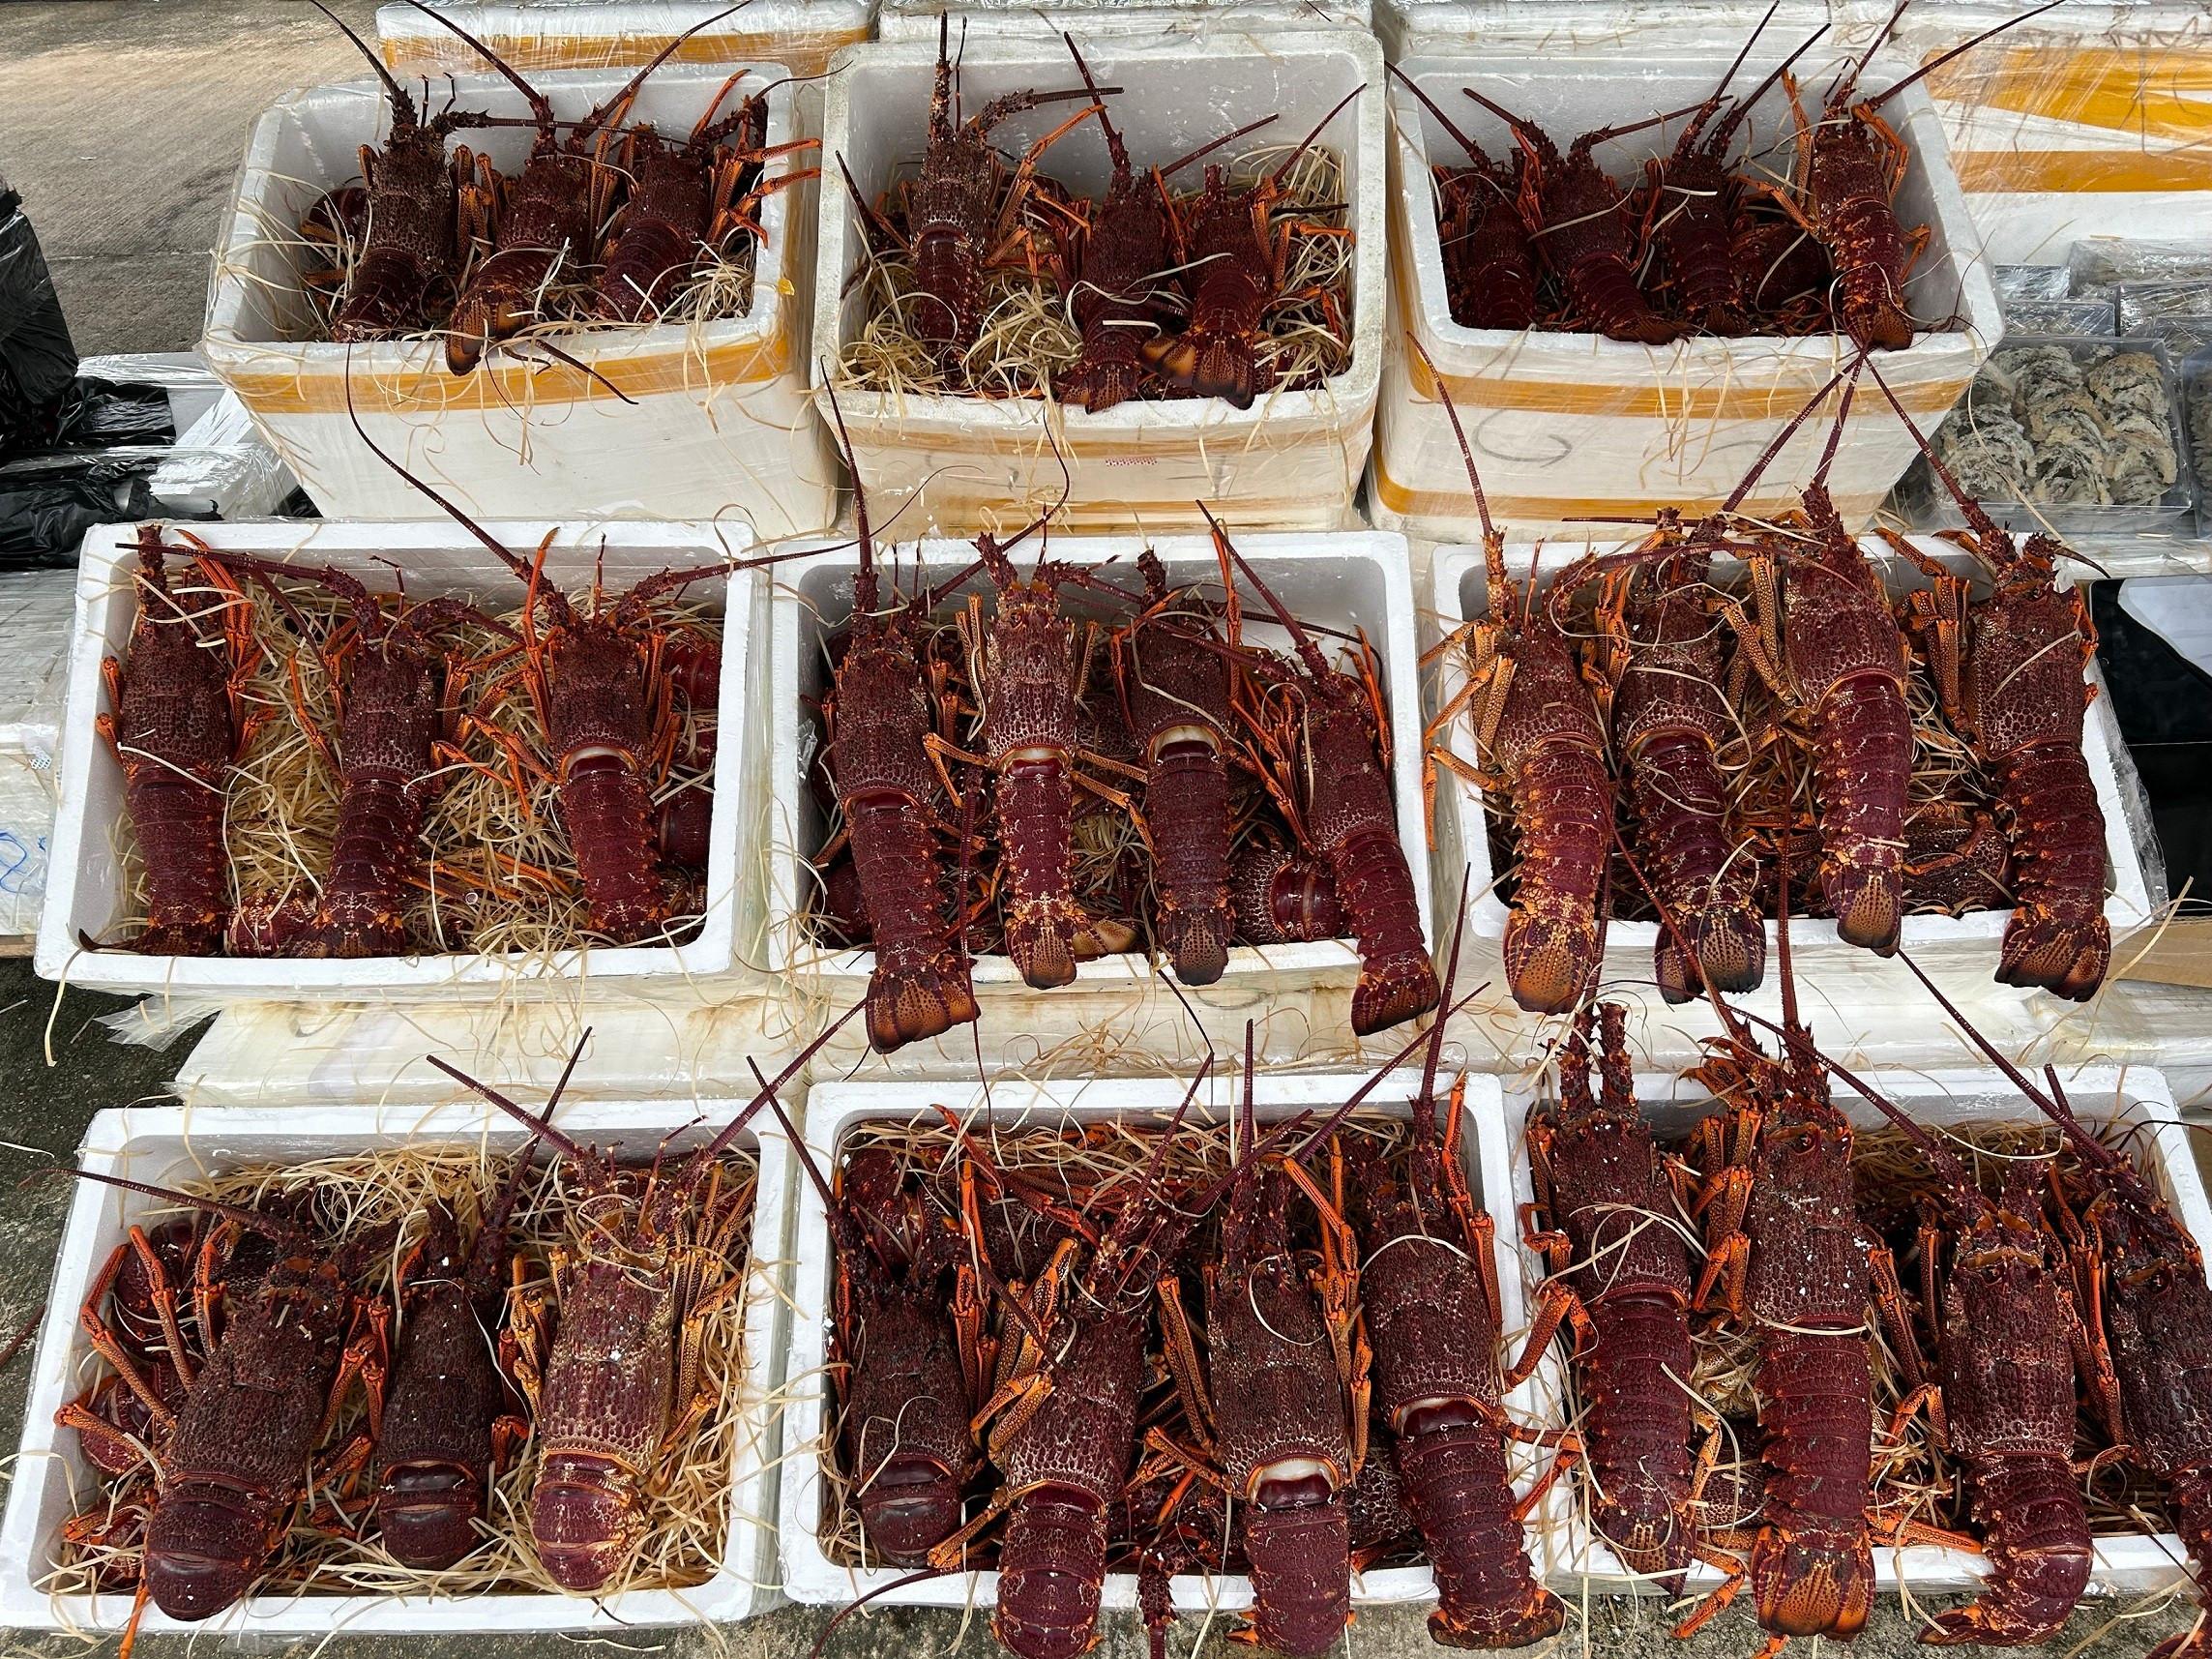 Hong Kong Customs yesterday (September 14) mounted an anti-smuggling operation in the Aberdeen Wholesale Fish Market and detected a suspected smuggling case involving a speedboat. A batch of suspected smuggled goods, with an estimated market value of about $11 million, was seized. Photo shows some of the suspected smuggled live lobsters seized.